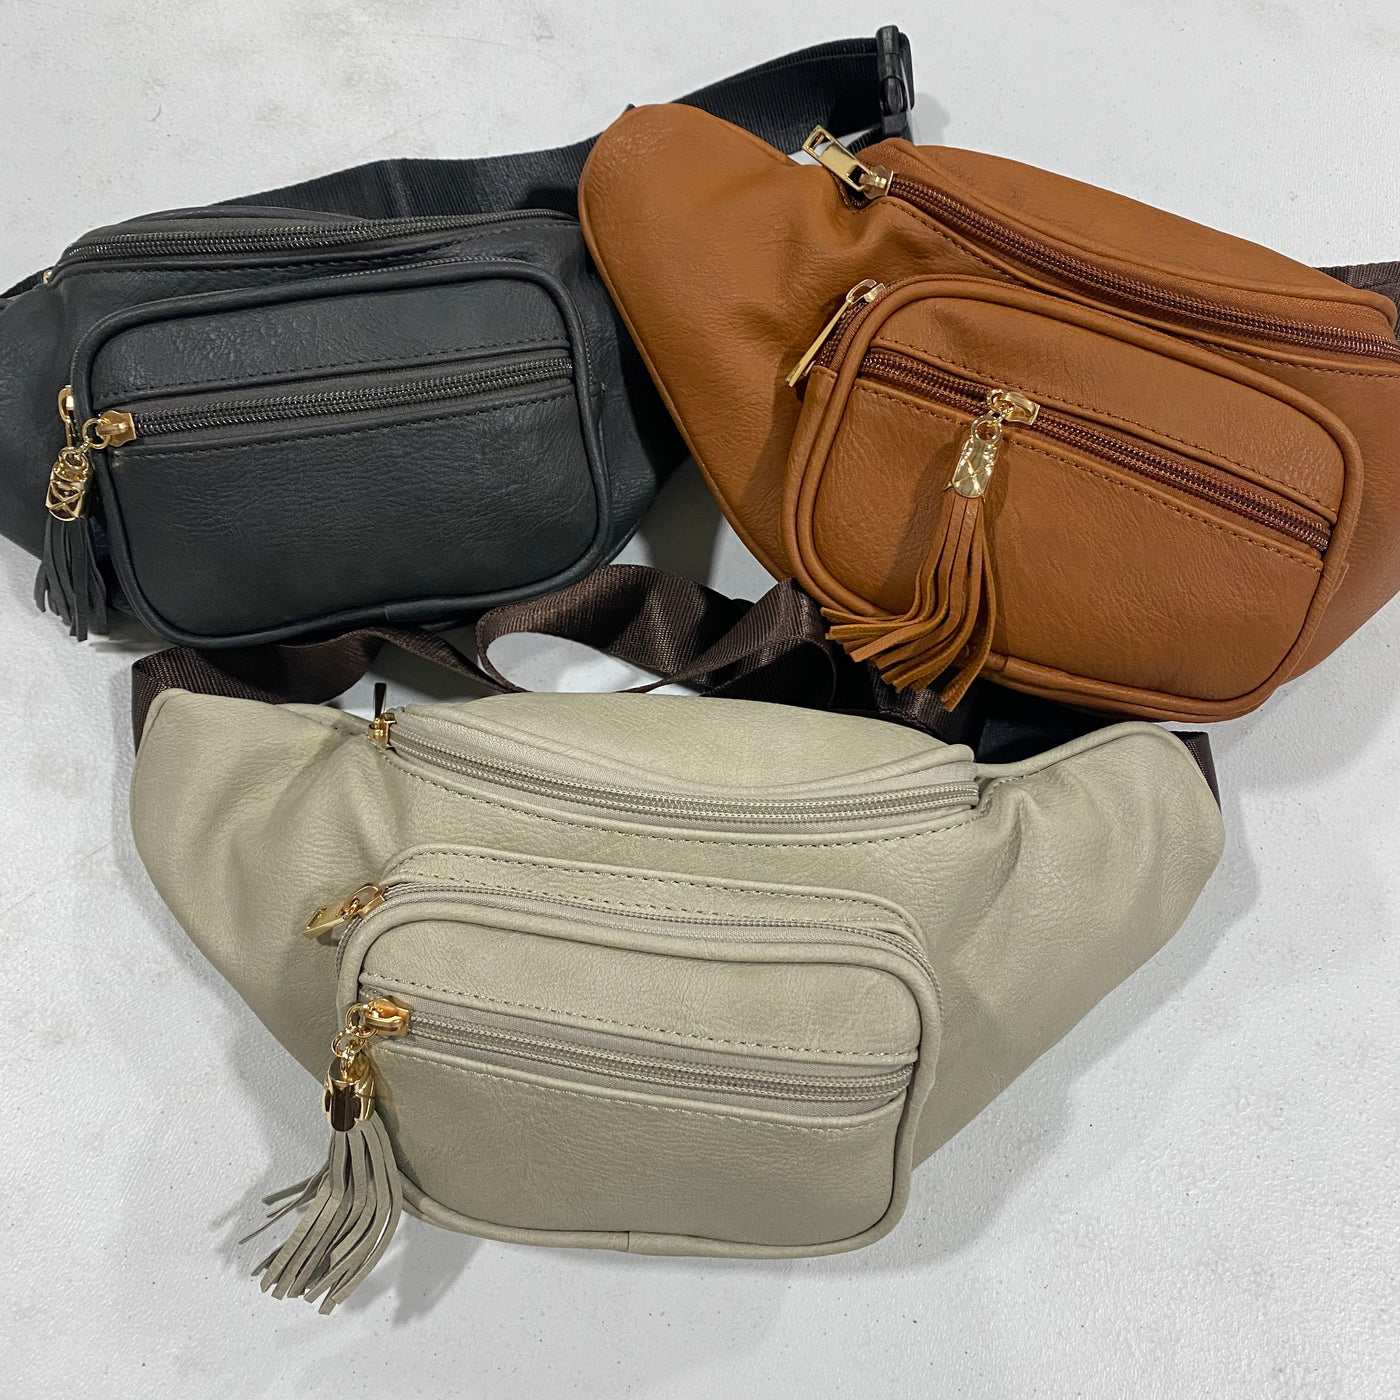 Vegan Leather Fanny Pack - 3 Options  Joia   